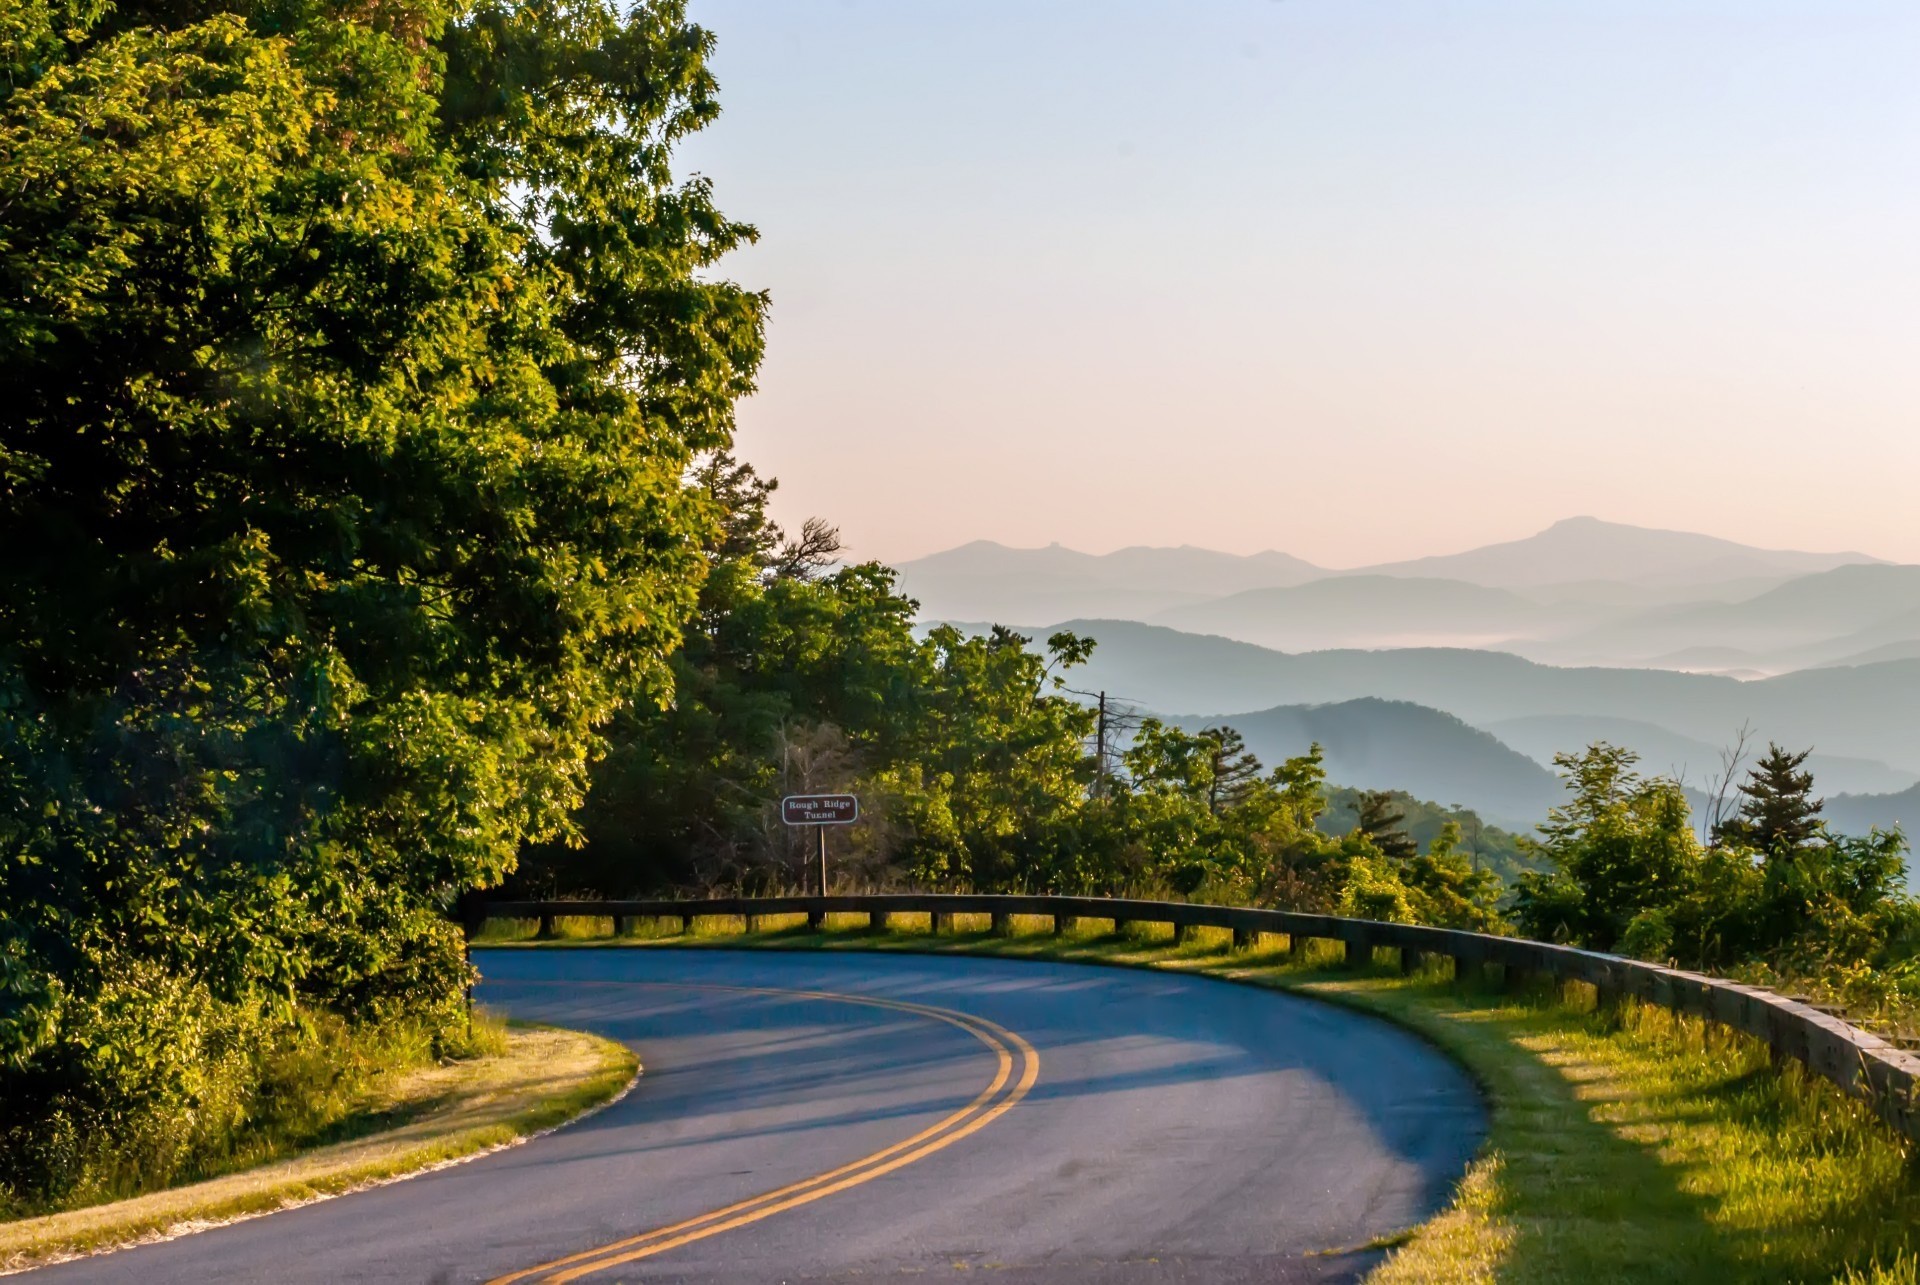 Smoky Mountains National Park, National Parks in the United States